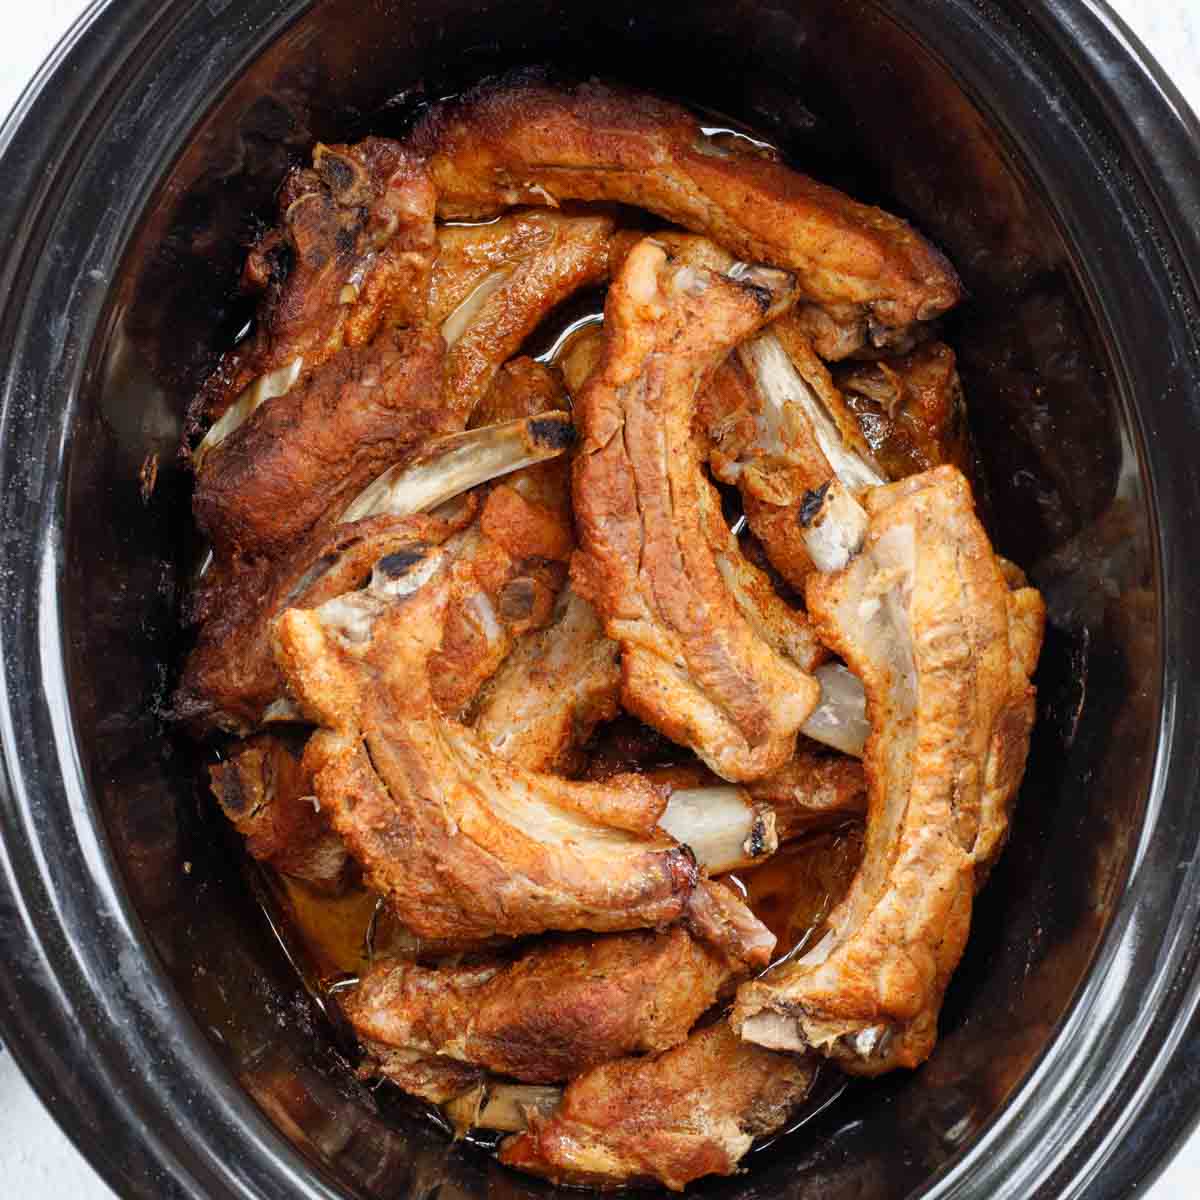 The cooked ribs in the crockpot.